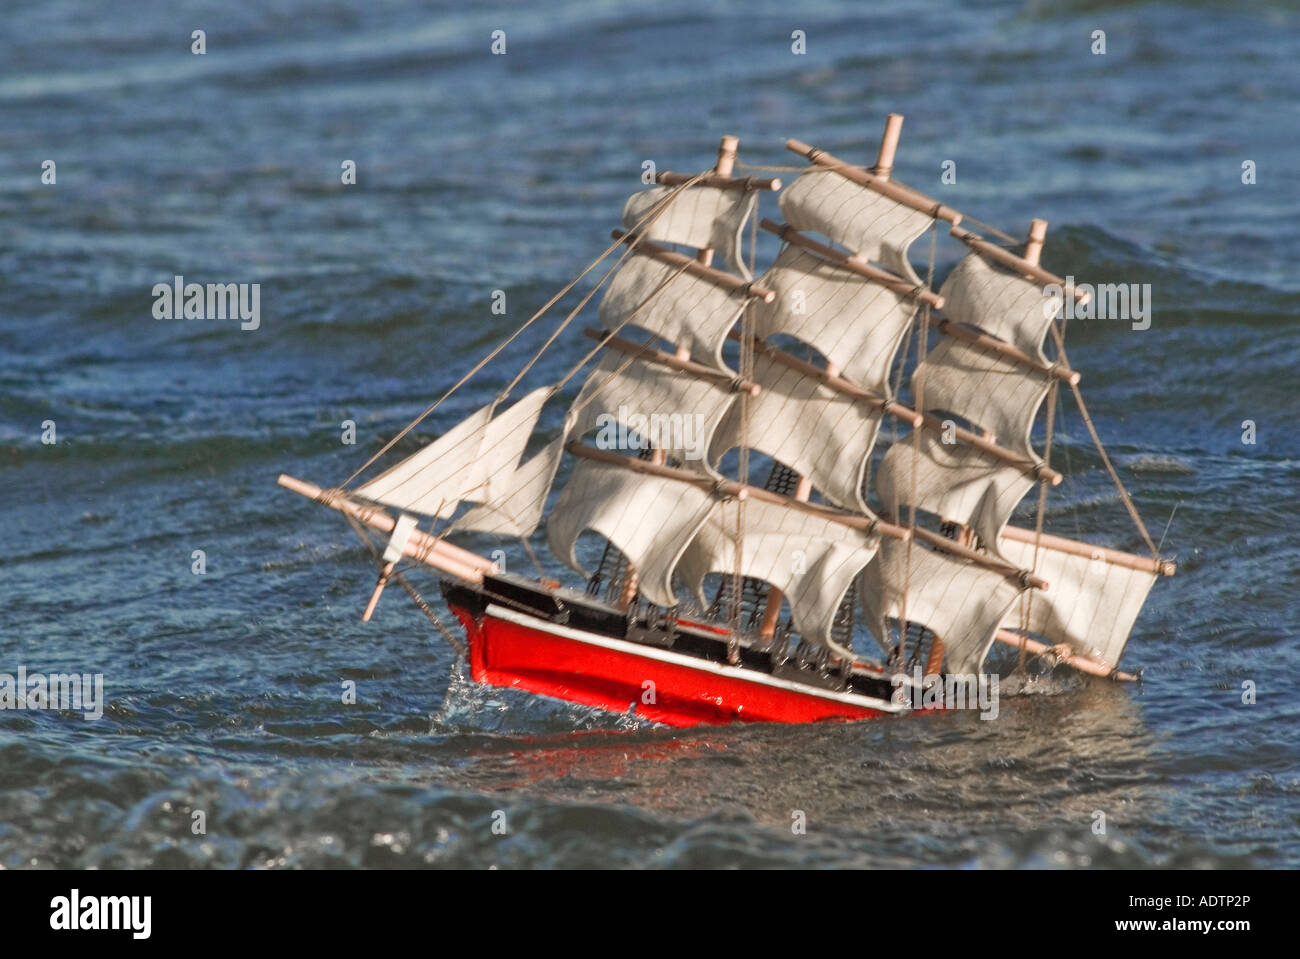 Sinking ship depicting the concept of a lost cause Stock Photo